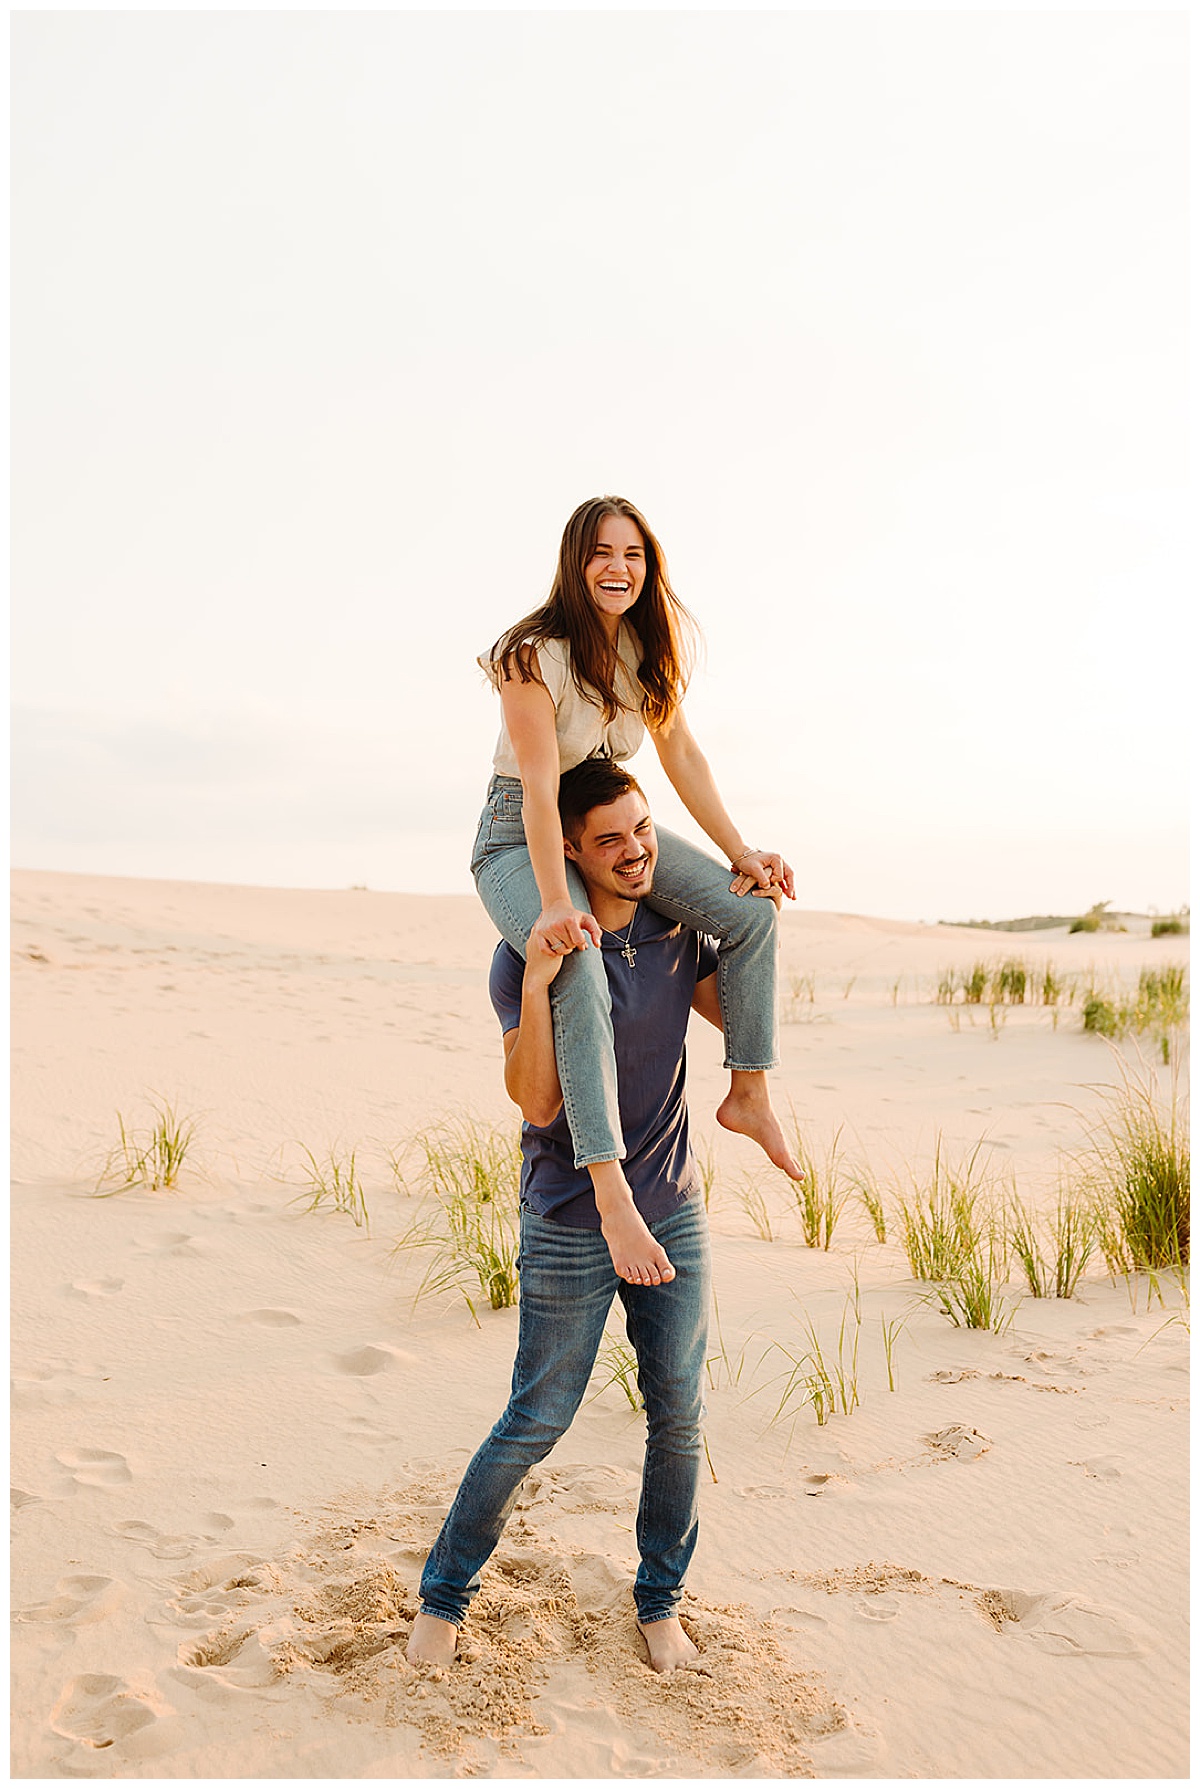 Woman rides on shoulders of guy for Kayla Bouren Photography